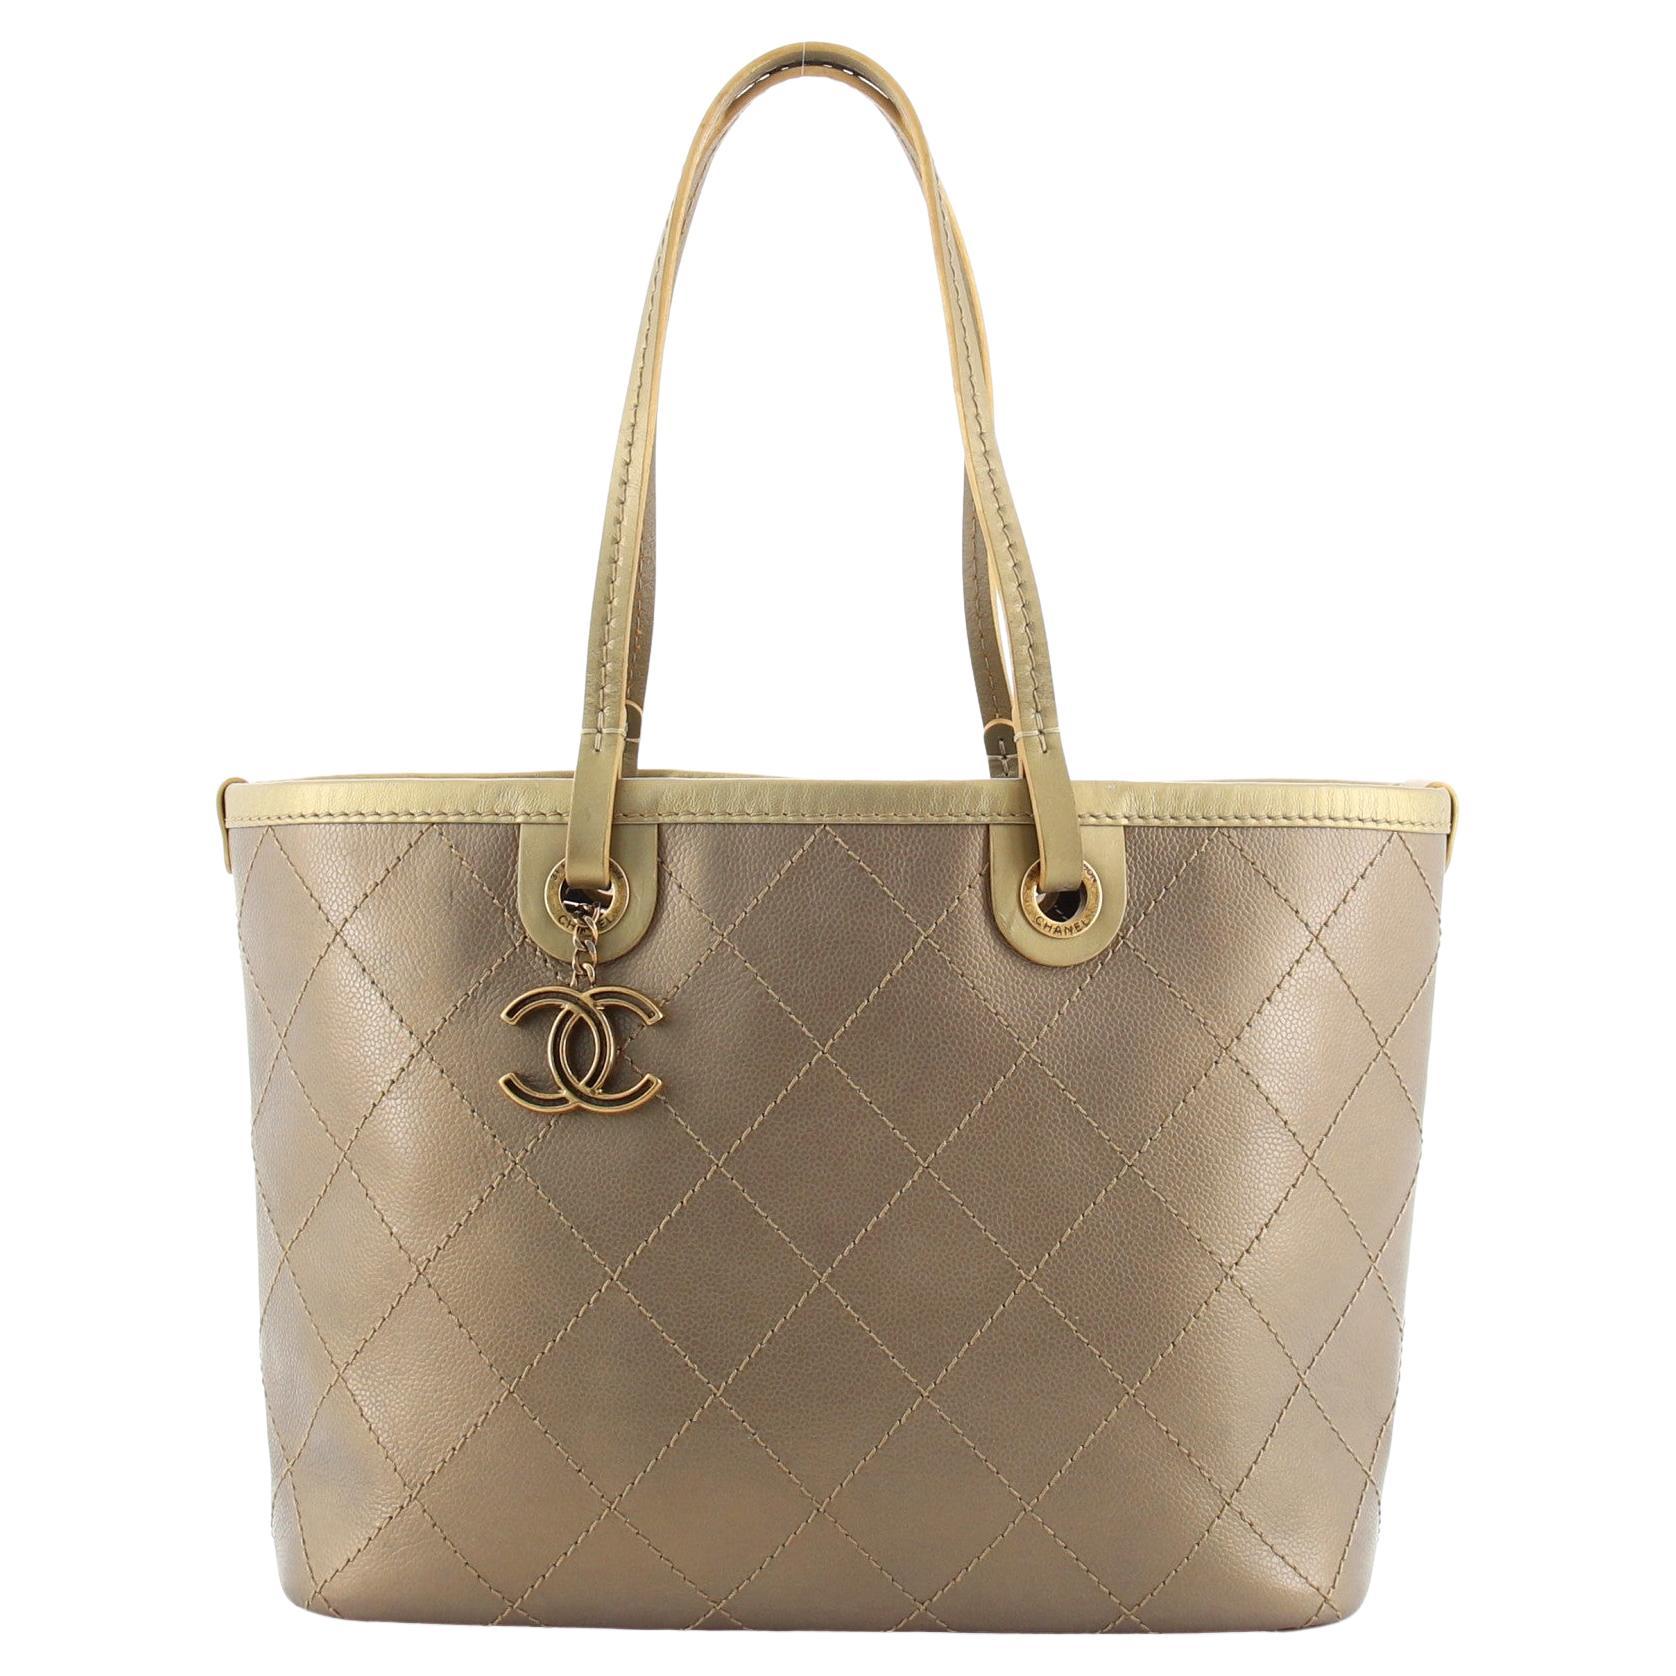 Chanel Grey/black Quilted Caviar Leather Fever Shopper Tote Chanel